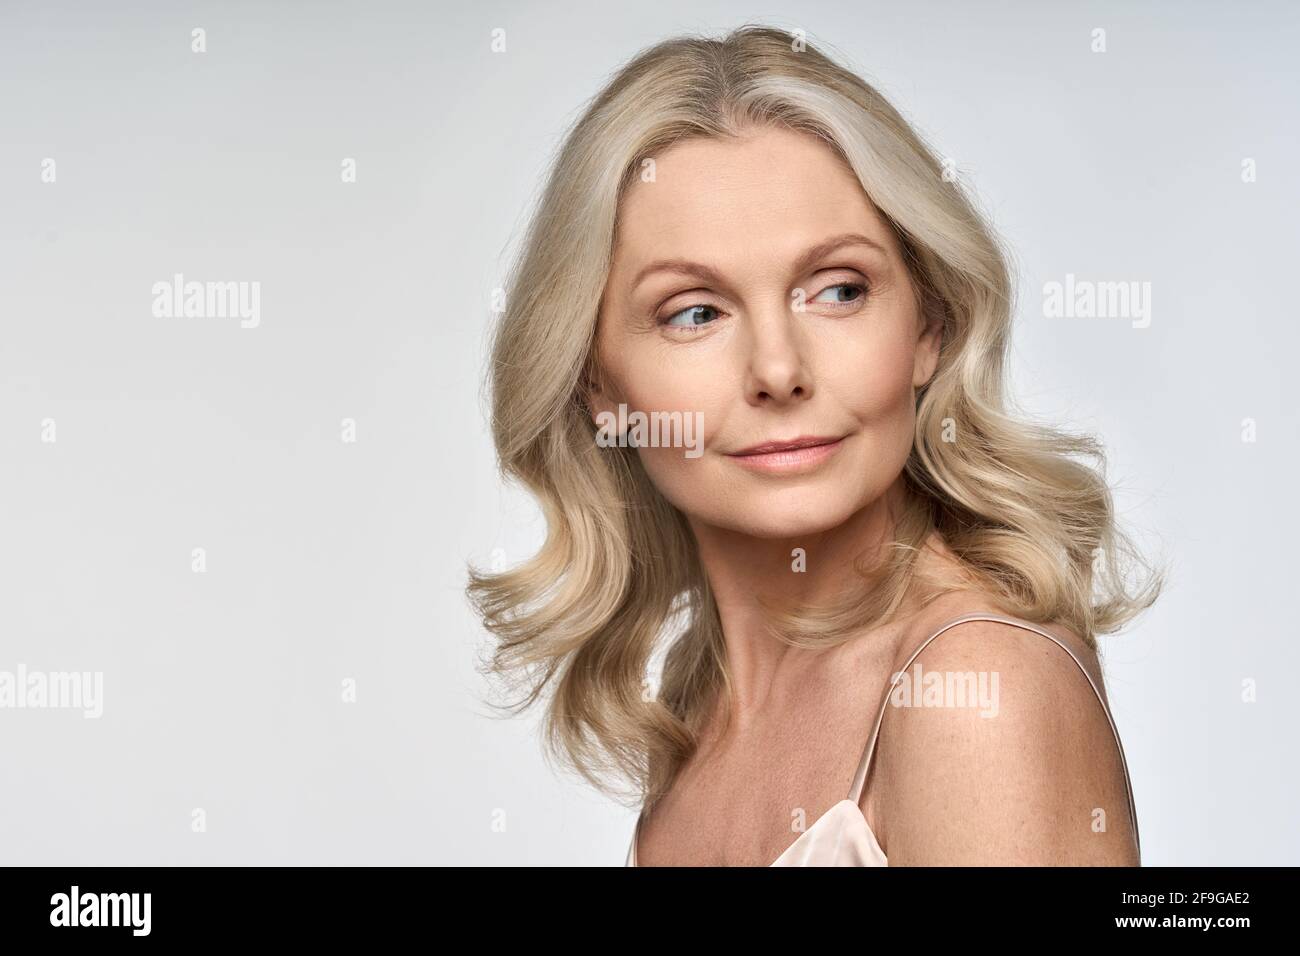 Portrait of mid age woman advertising face and body care on white background. Stock Photo